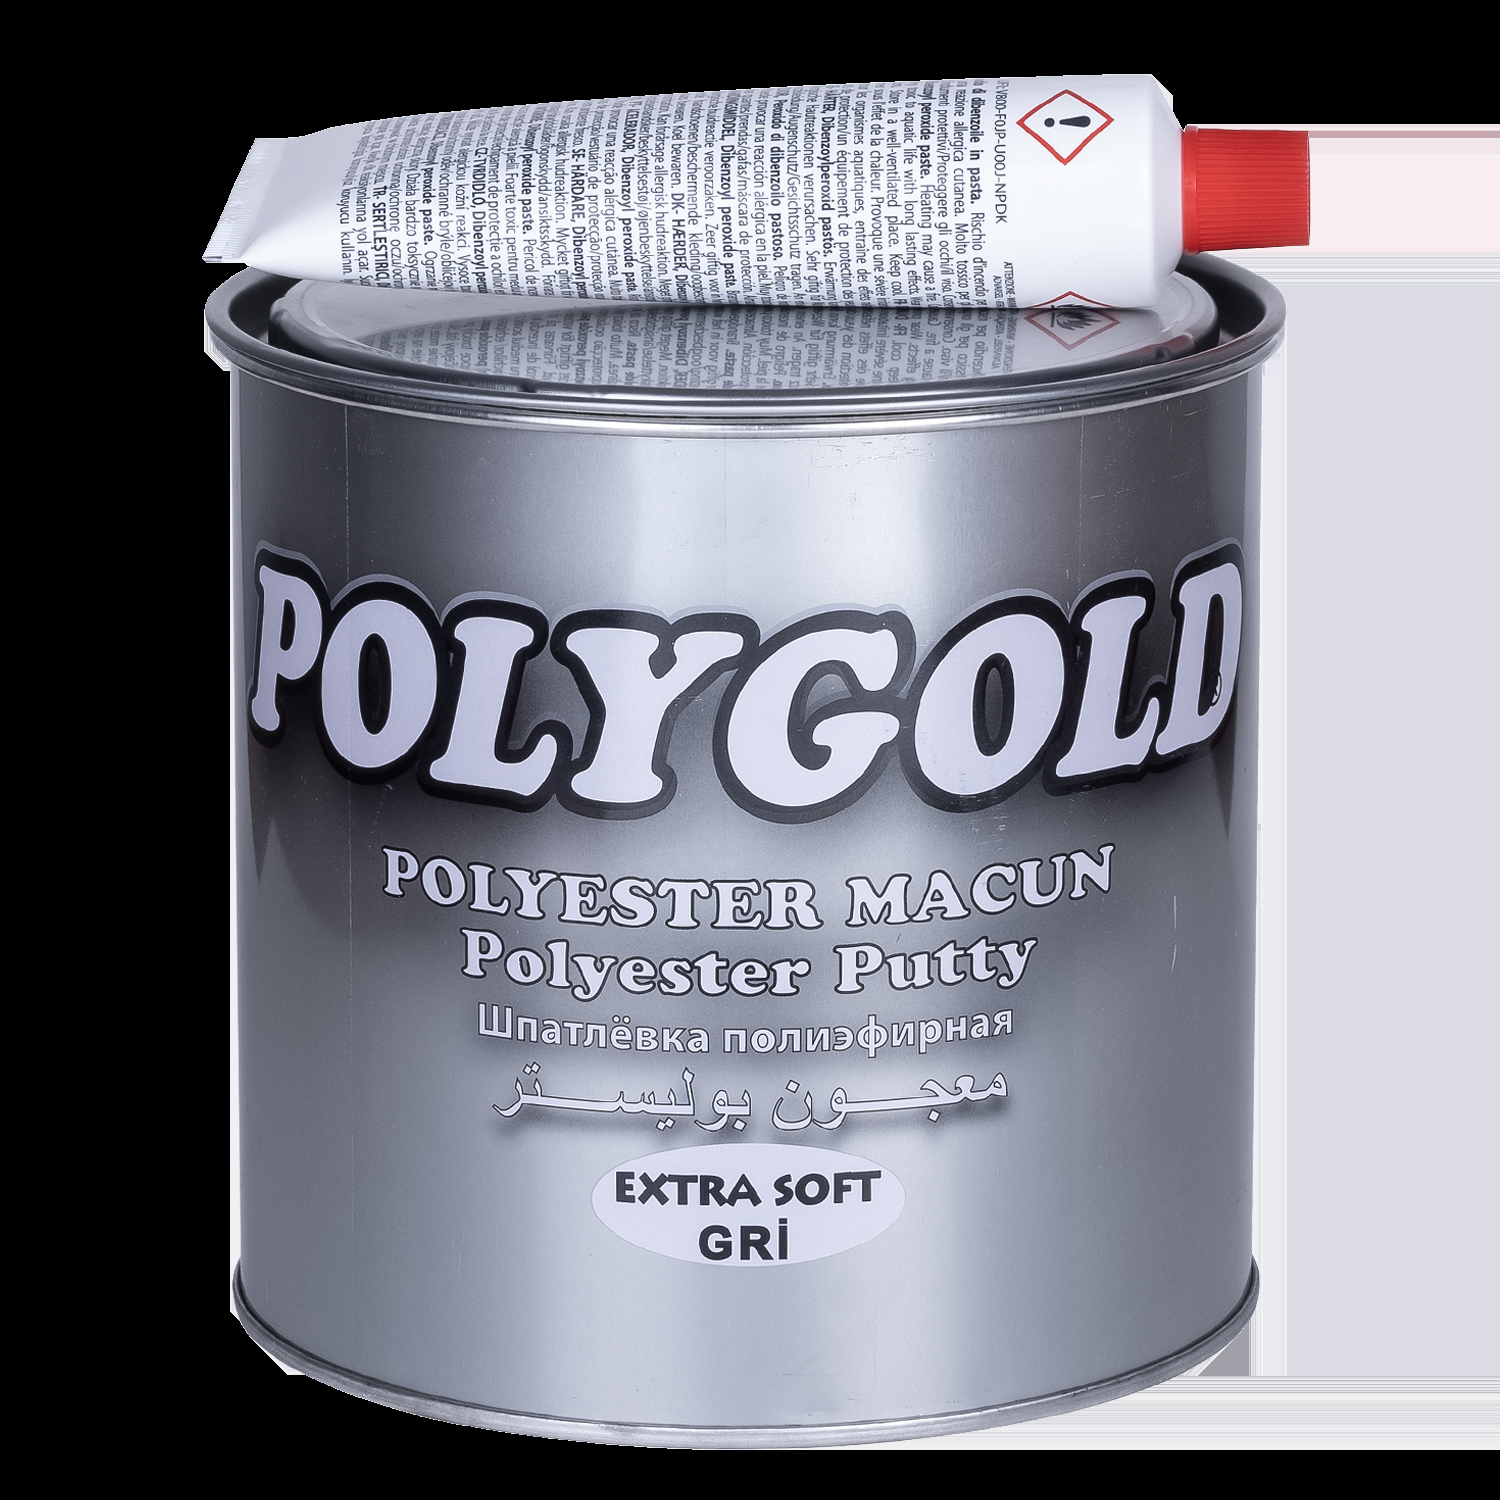 Polygold Polyester Macun Extra Soft Gri